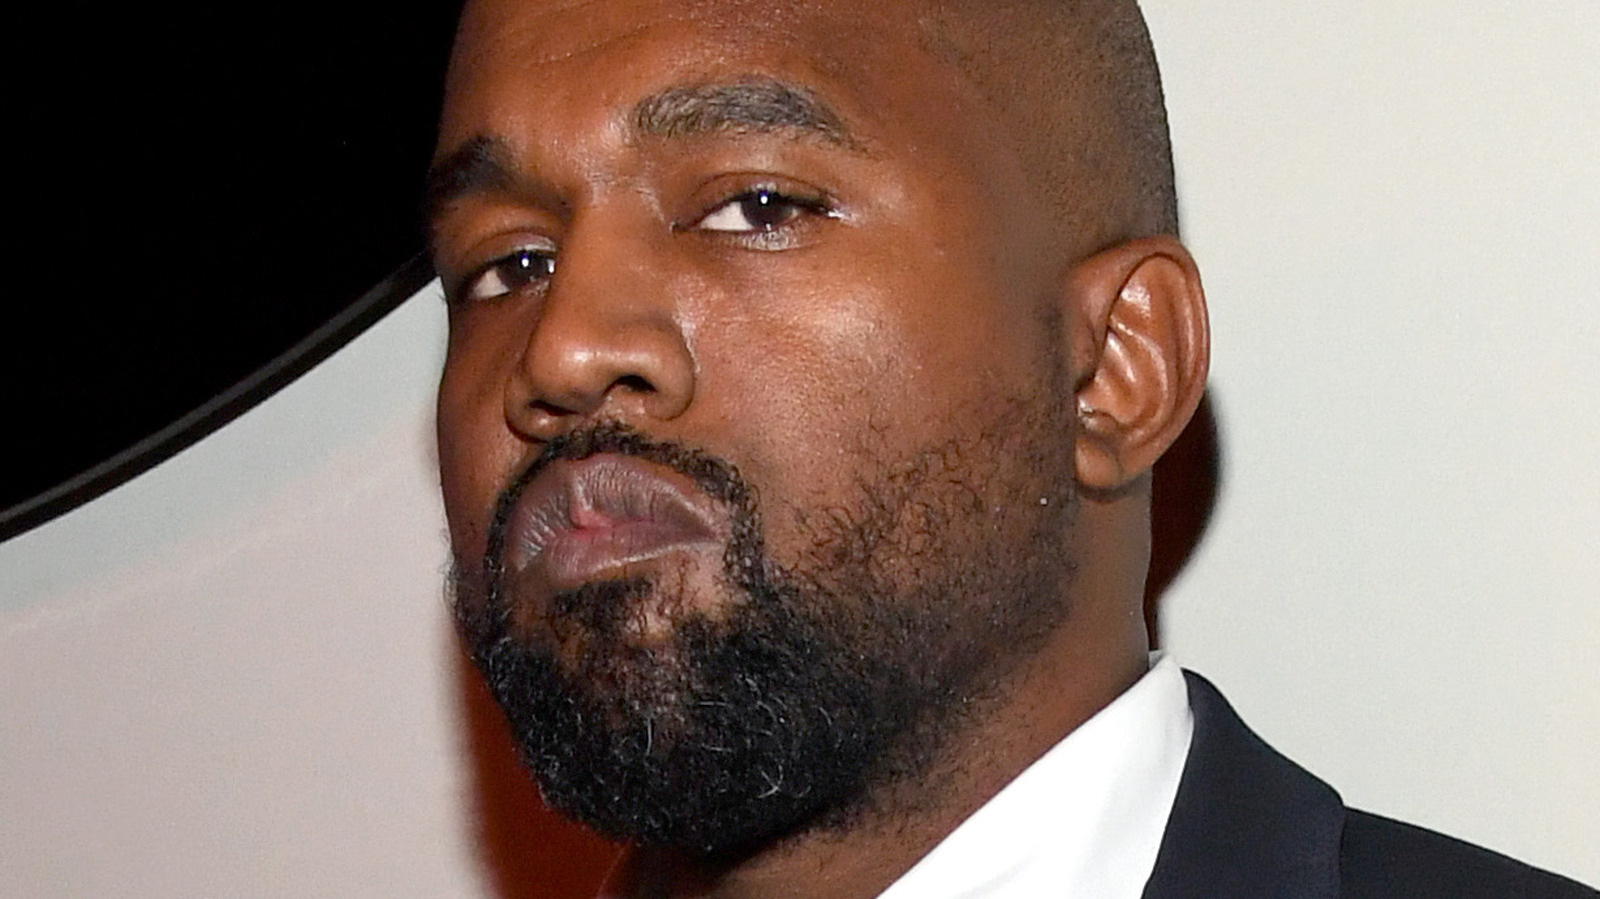 Kanye West Has Bold Plans For Yeezy After Falling Out With Gap